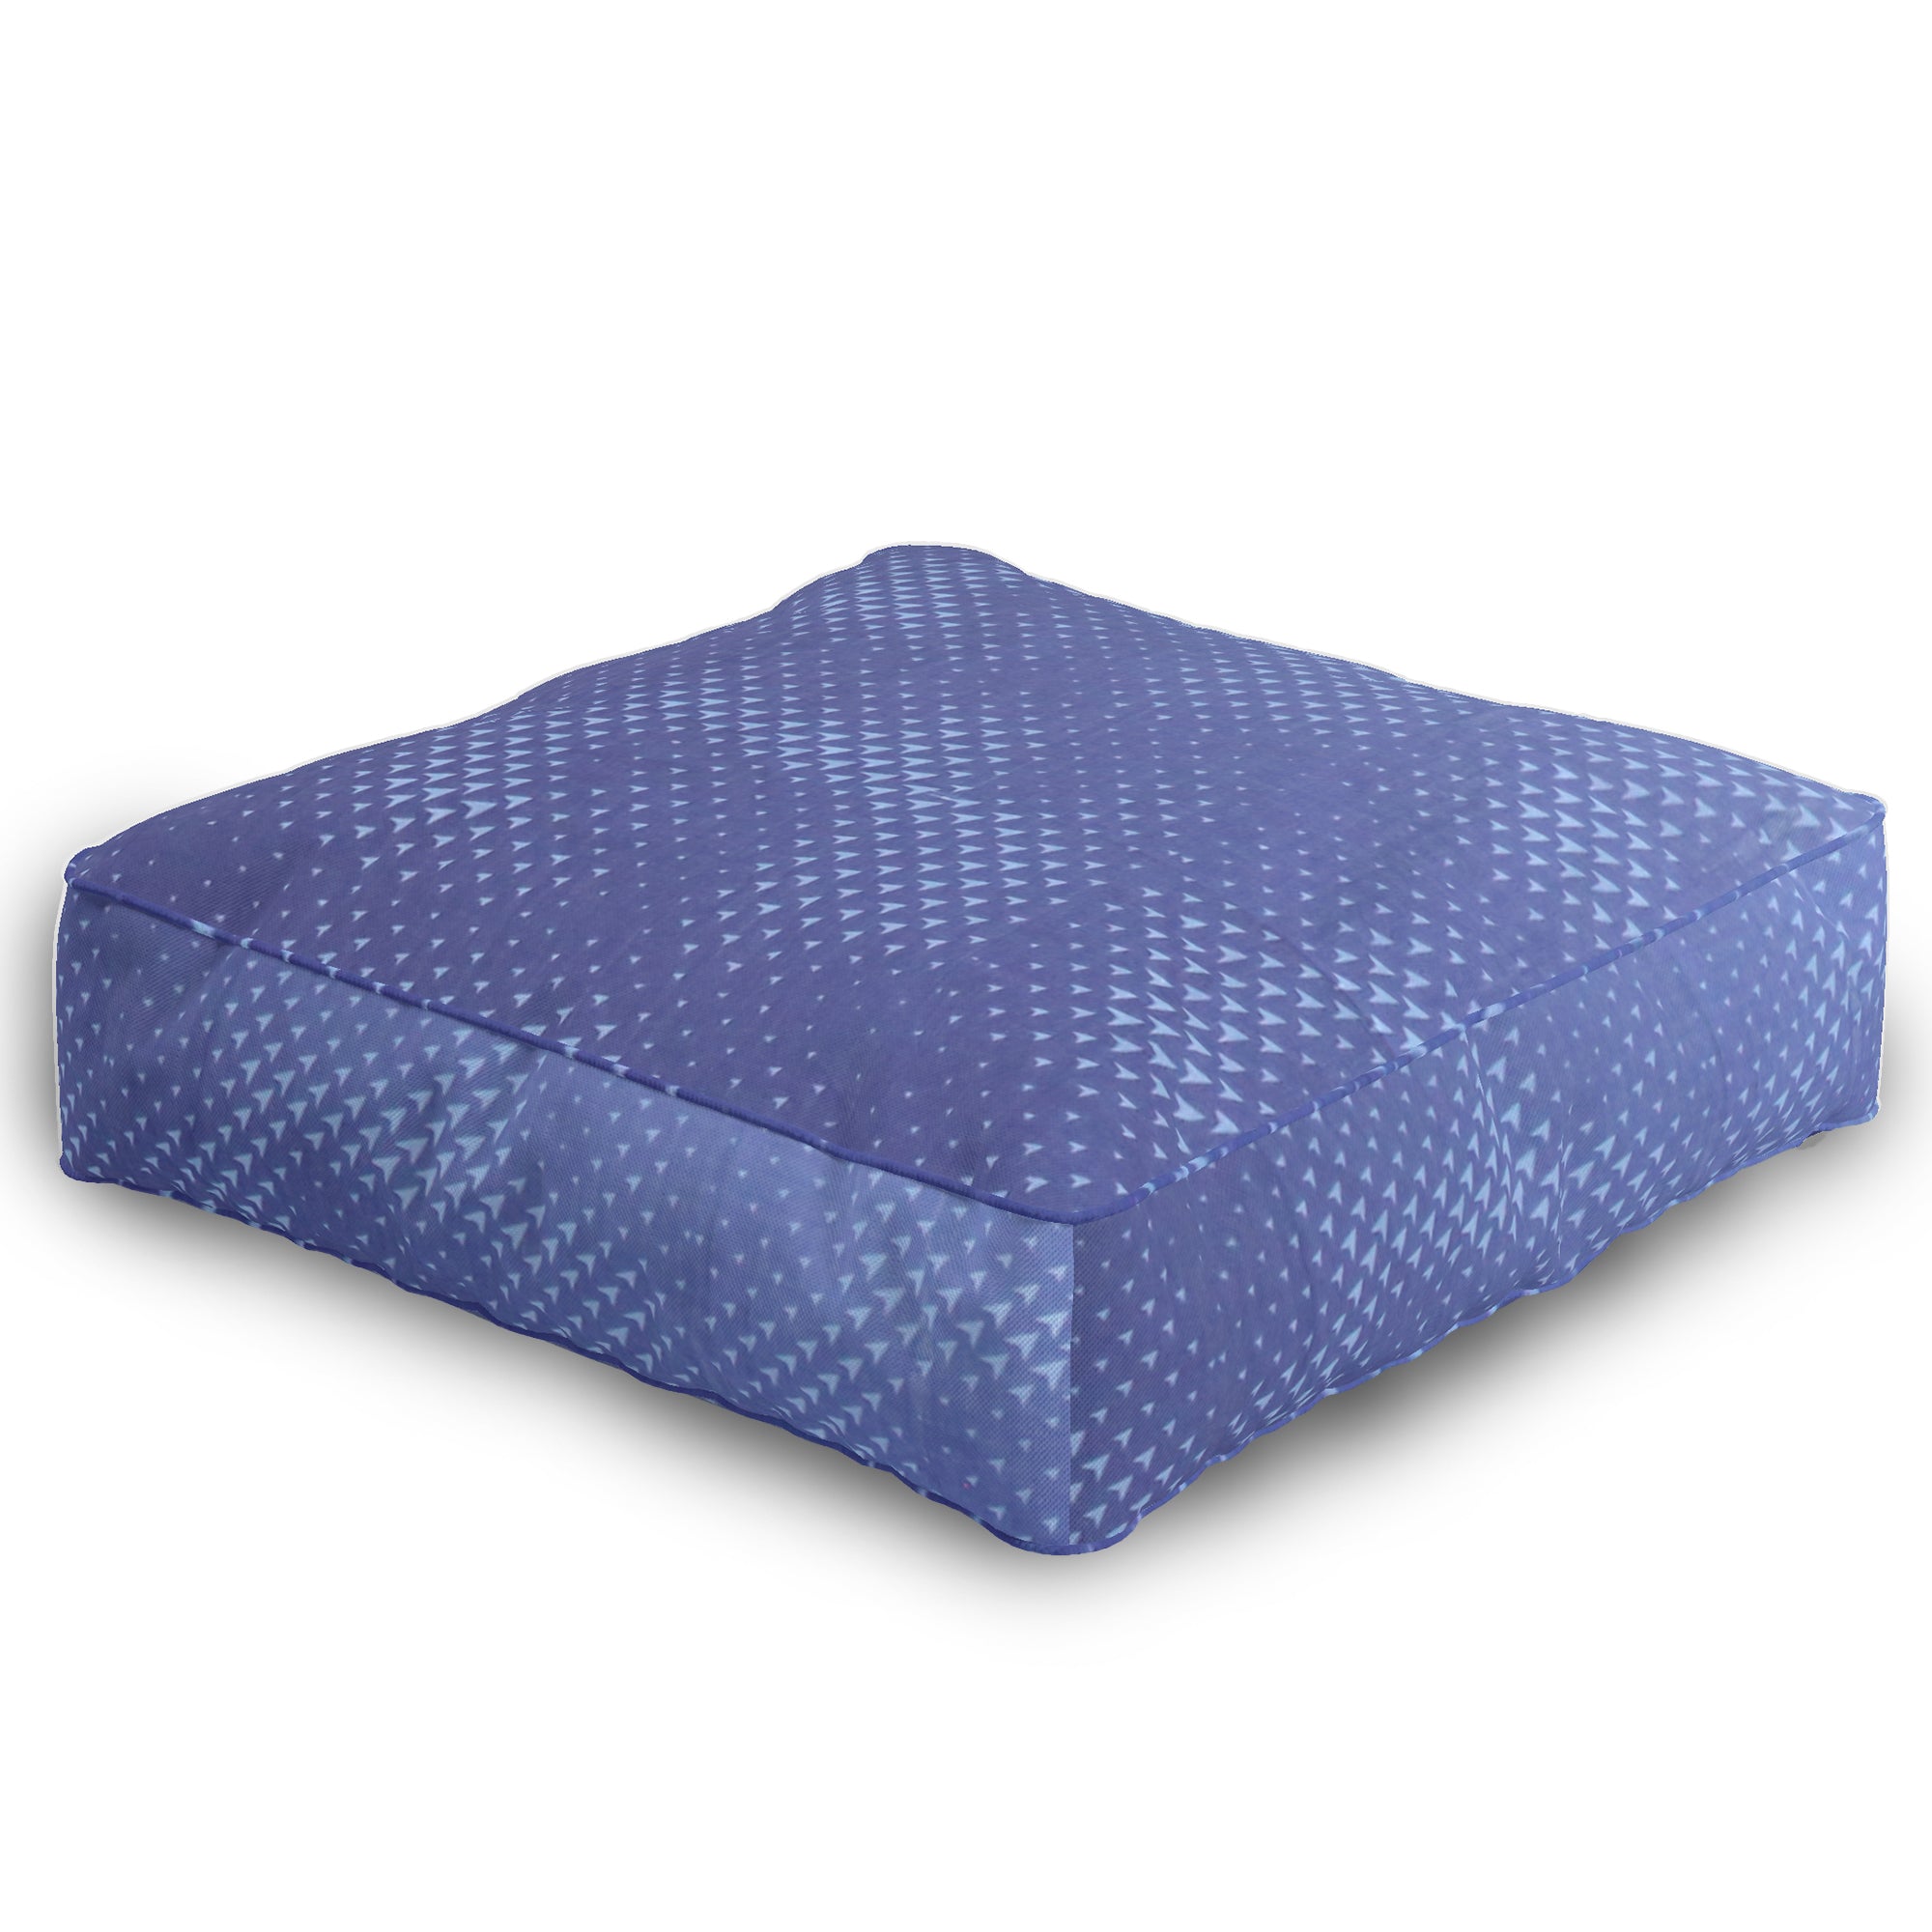 Coozly Zippered Foam Floor Cushions | Seat Cushions | Sofa Cushions with Removable Covers - Blue Scale